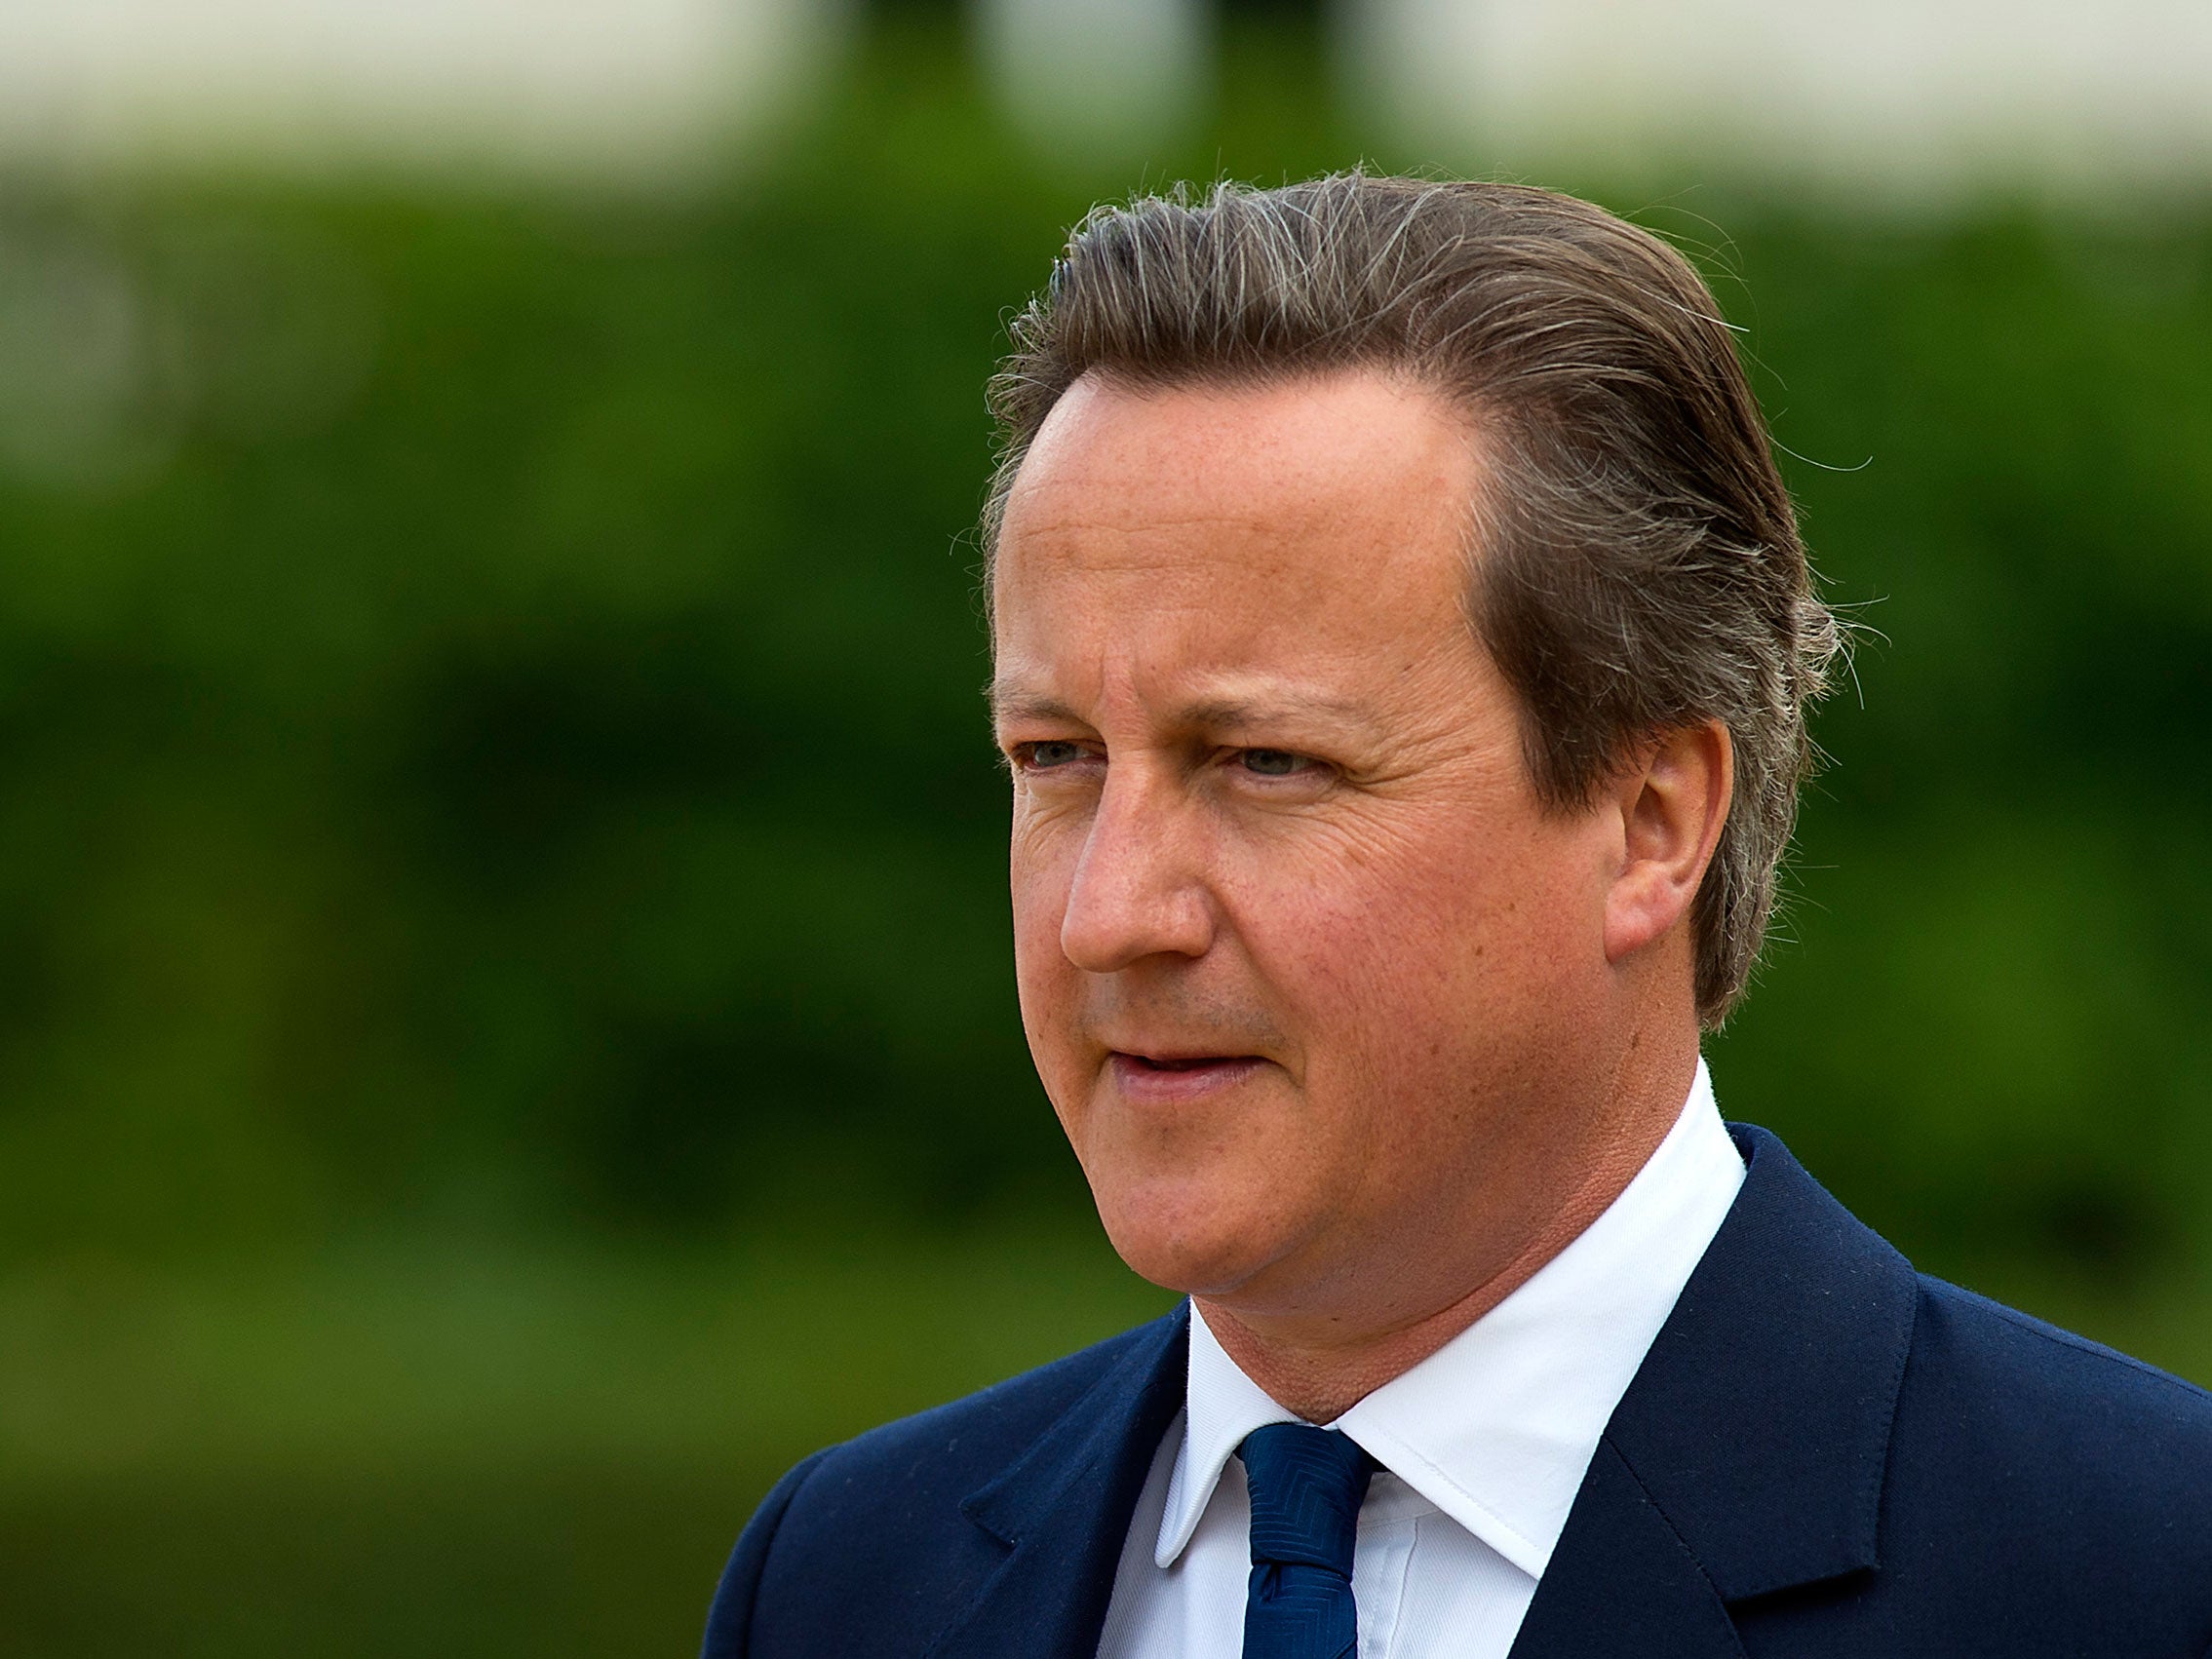 David Cameron finally broke his silence on the Syrian refugee crisis after pictures of the dead Syrian refugee boy Aylan Kurdi emerged on Wednesday